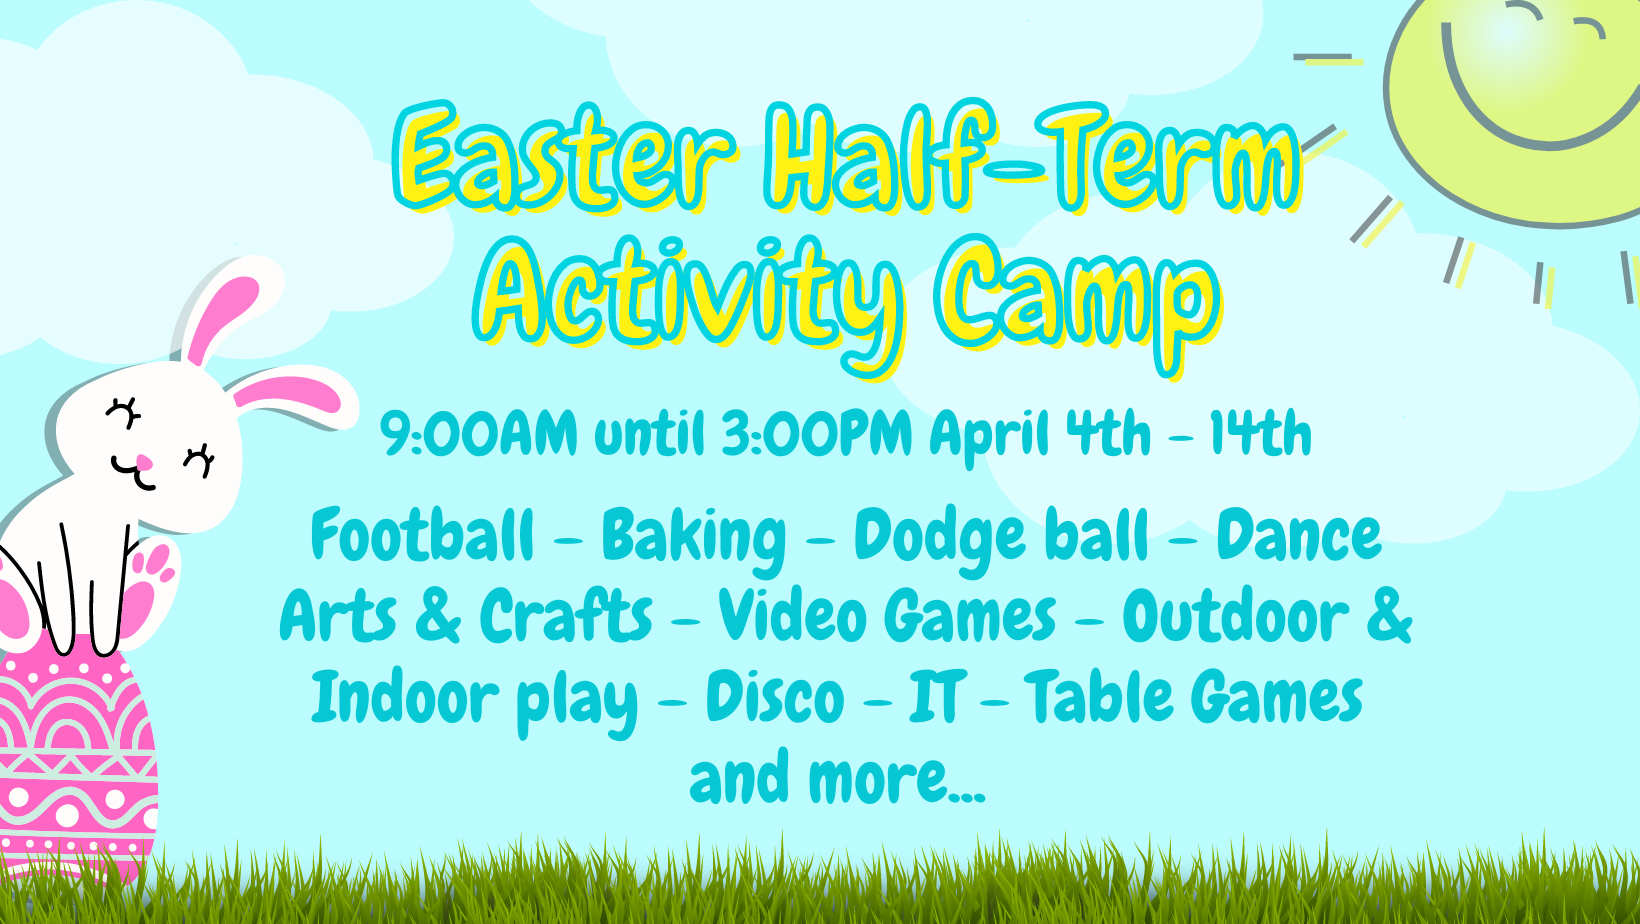 Easter HalfTerm Activity Camp Hunslet Club